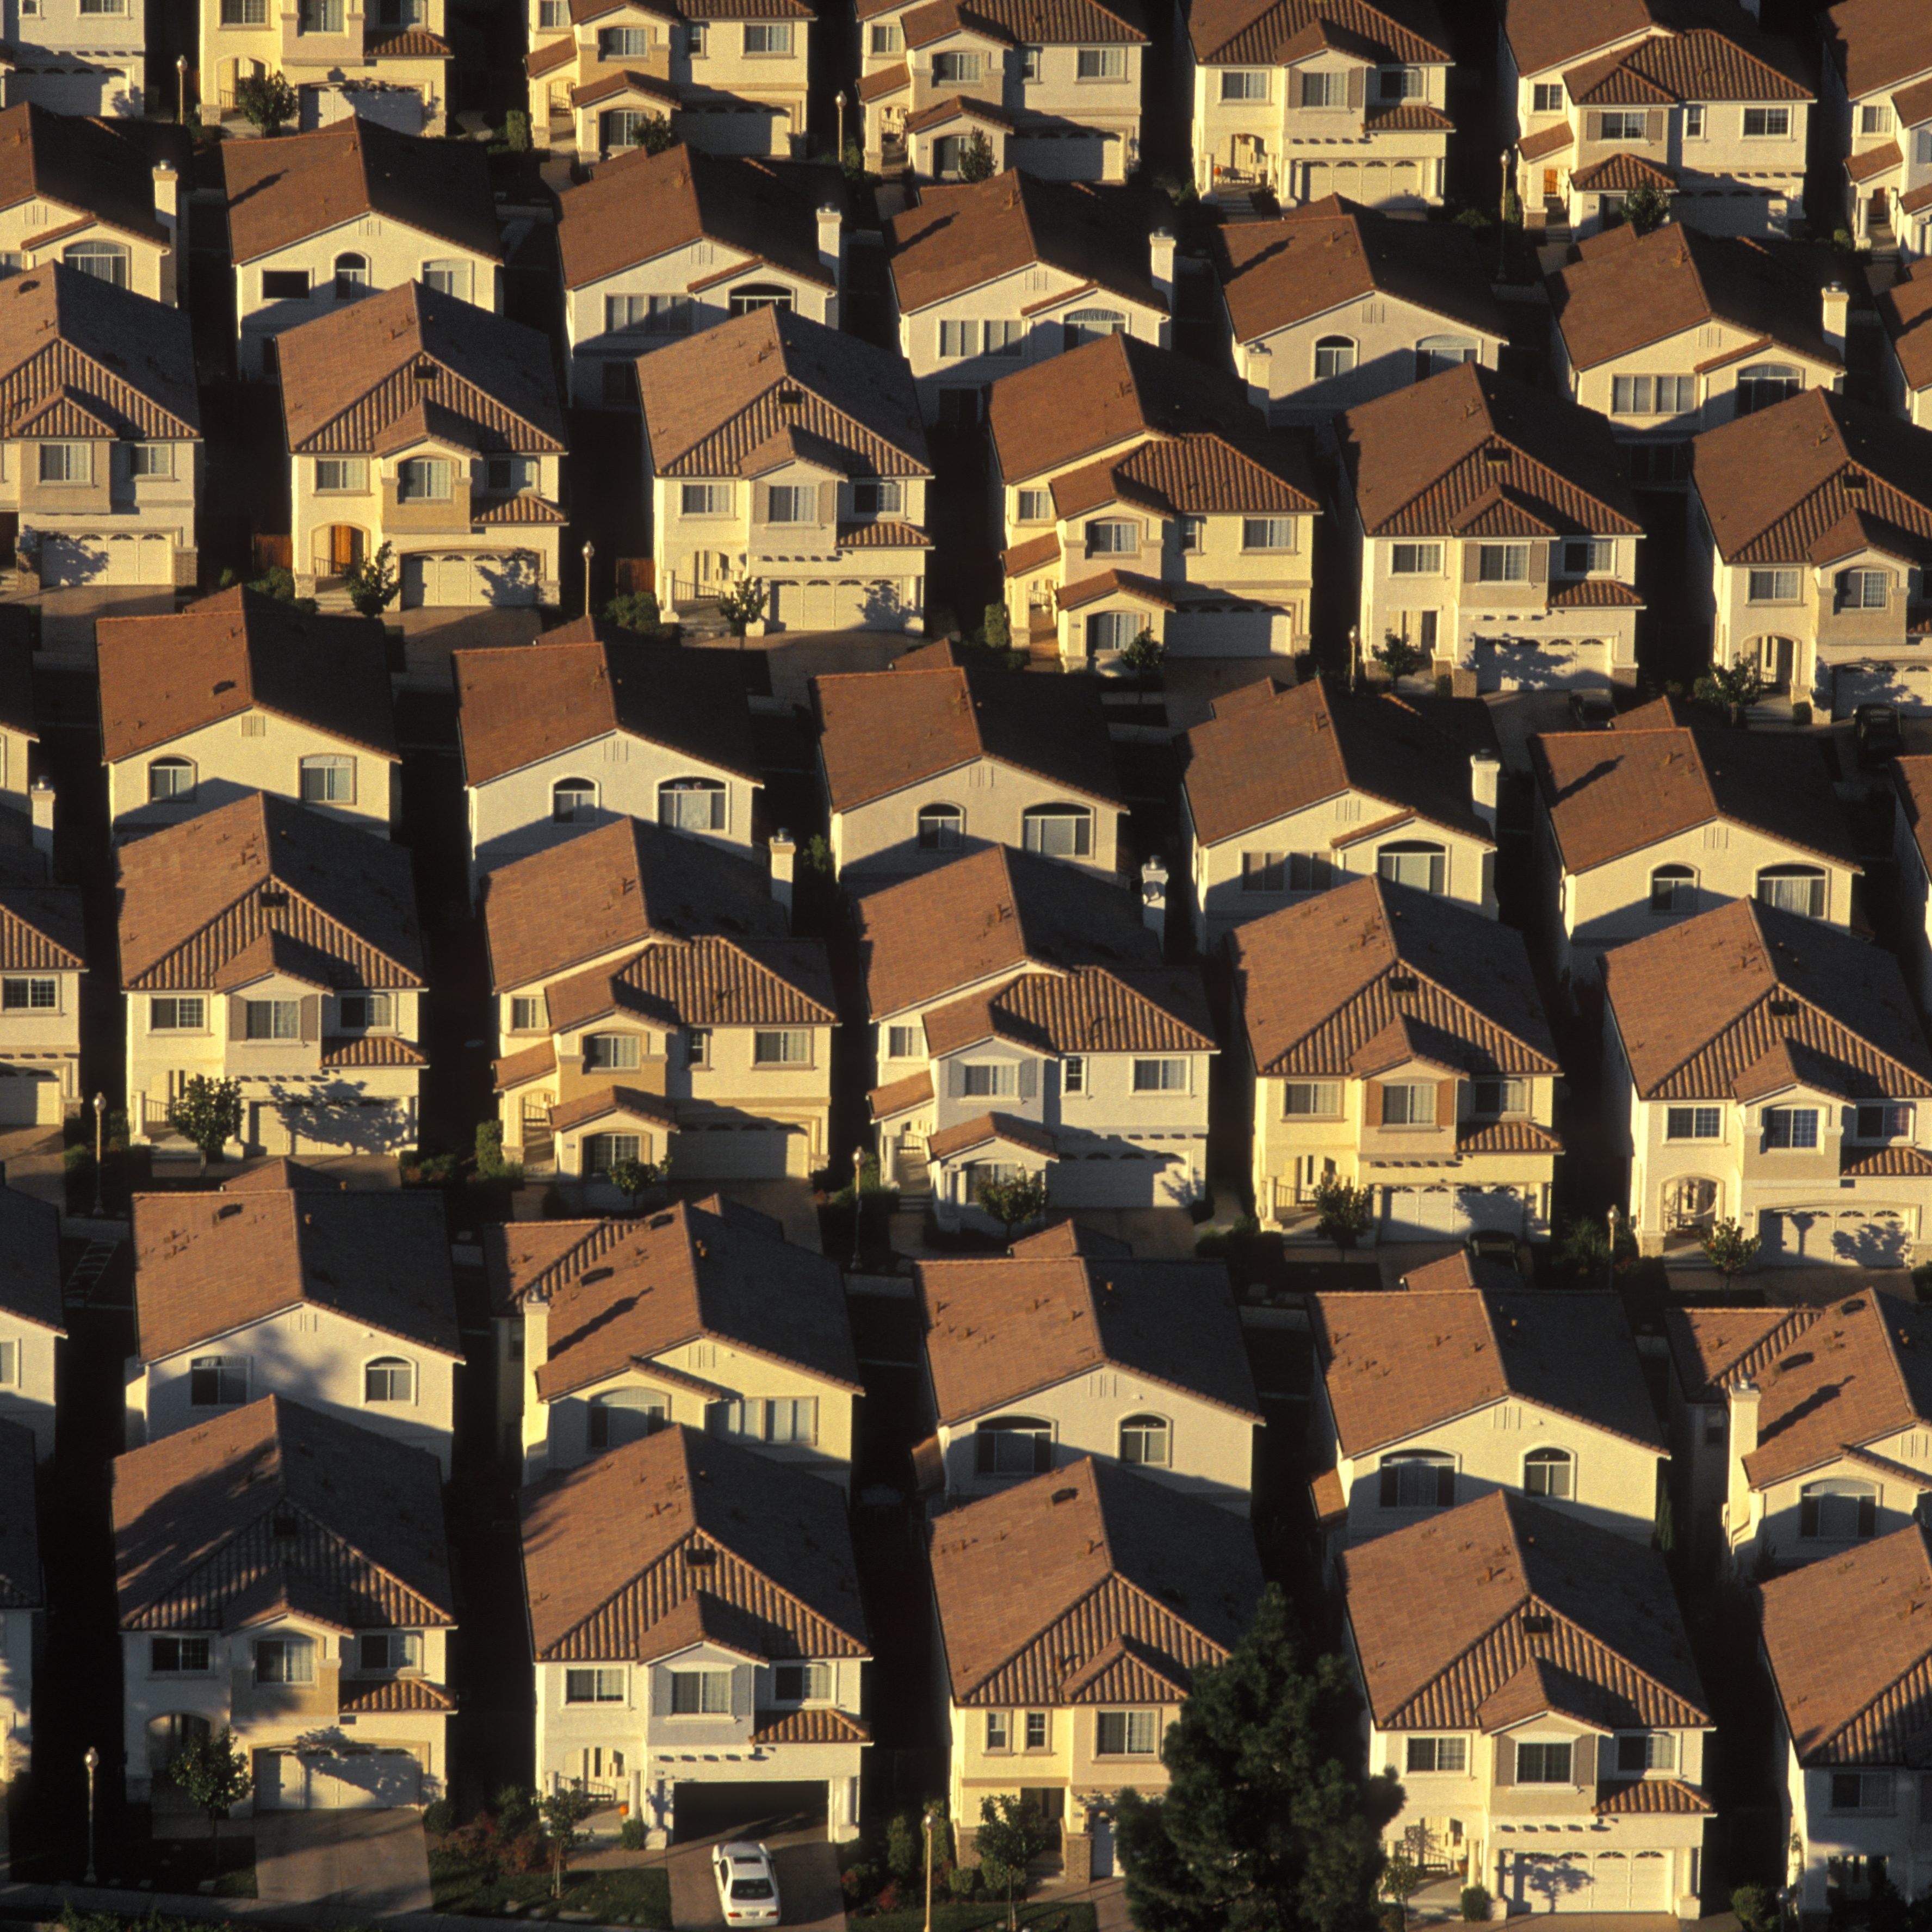 Rows of identical two-story houses with red-tiled roofs are closely packed together, creating a grid-like pattern, with shadows accentuating the uniformity.